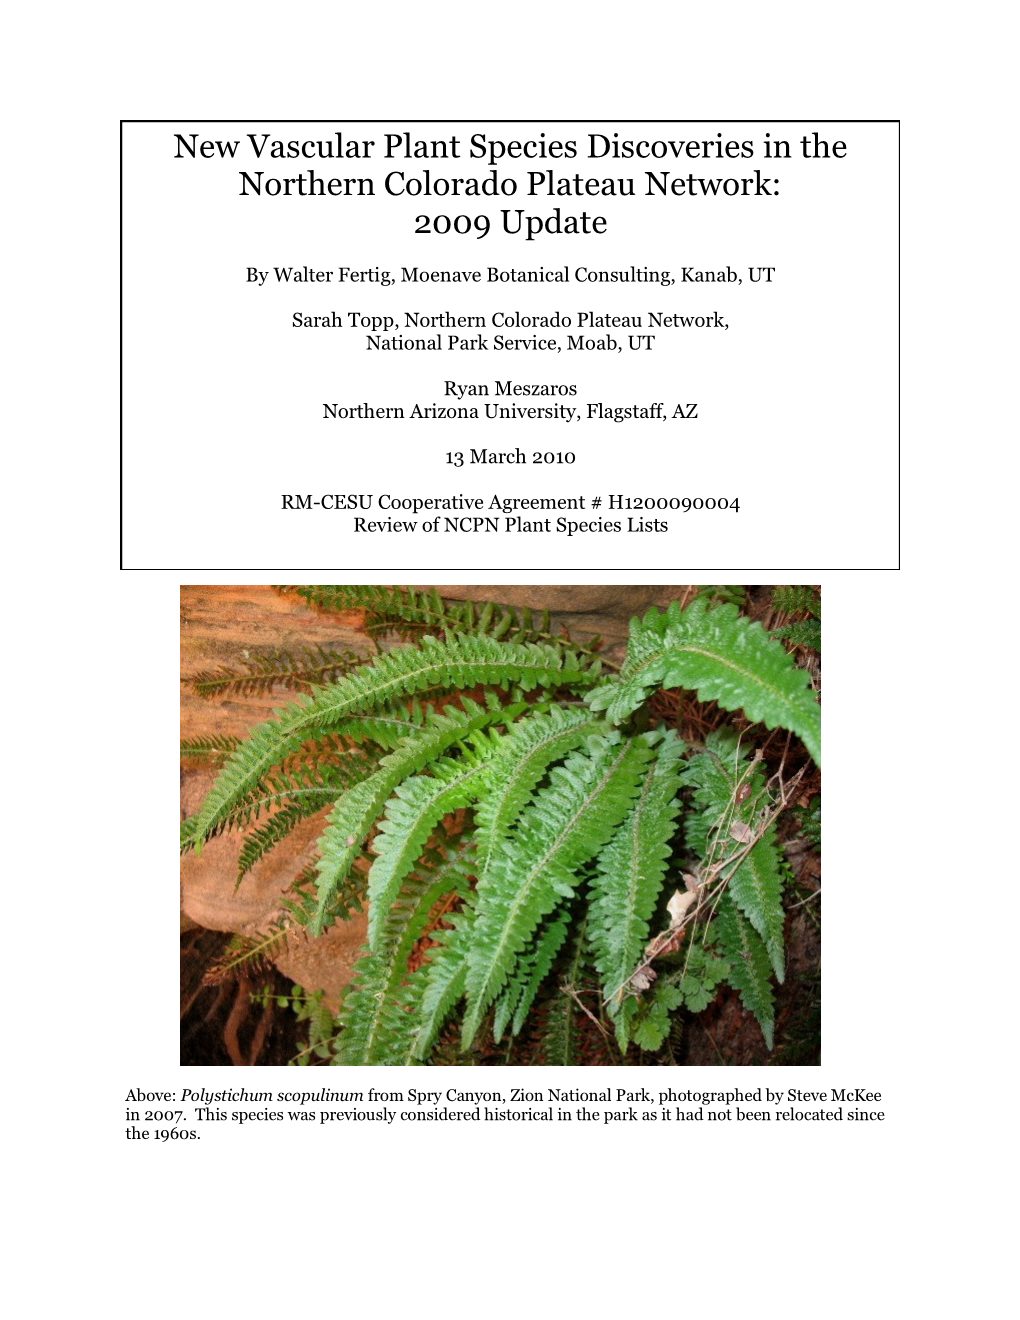 New Vascular Plant Species Discoveries in the Northern Colorado Plateau Network: 2009 Update